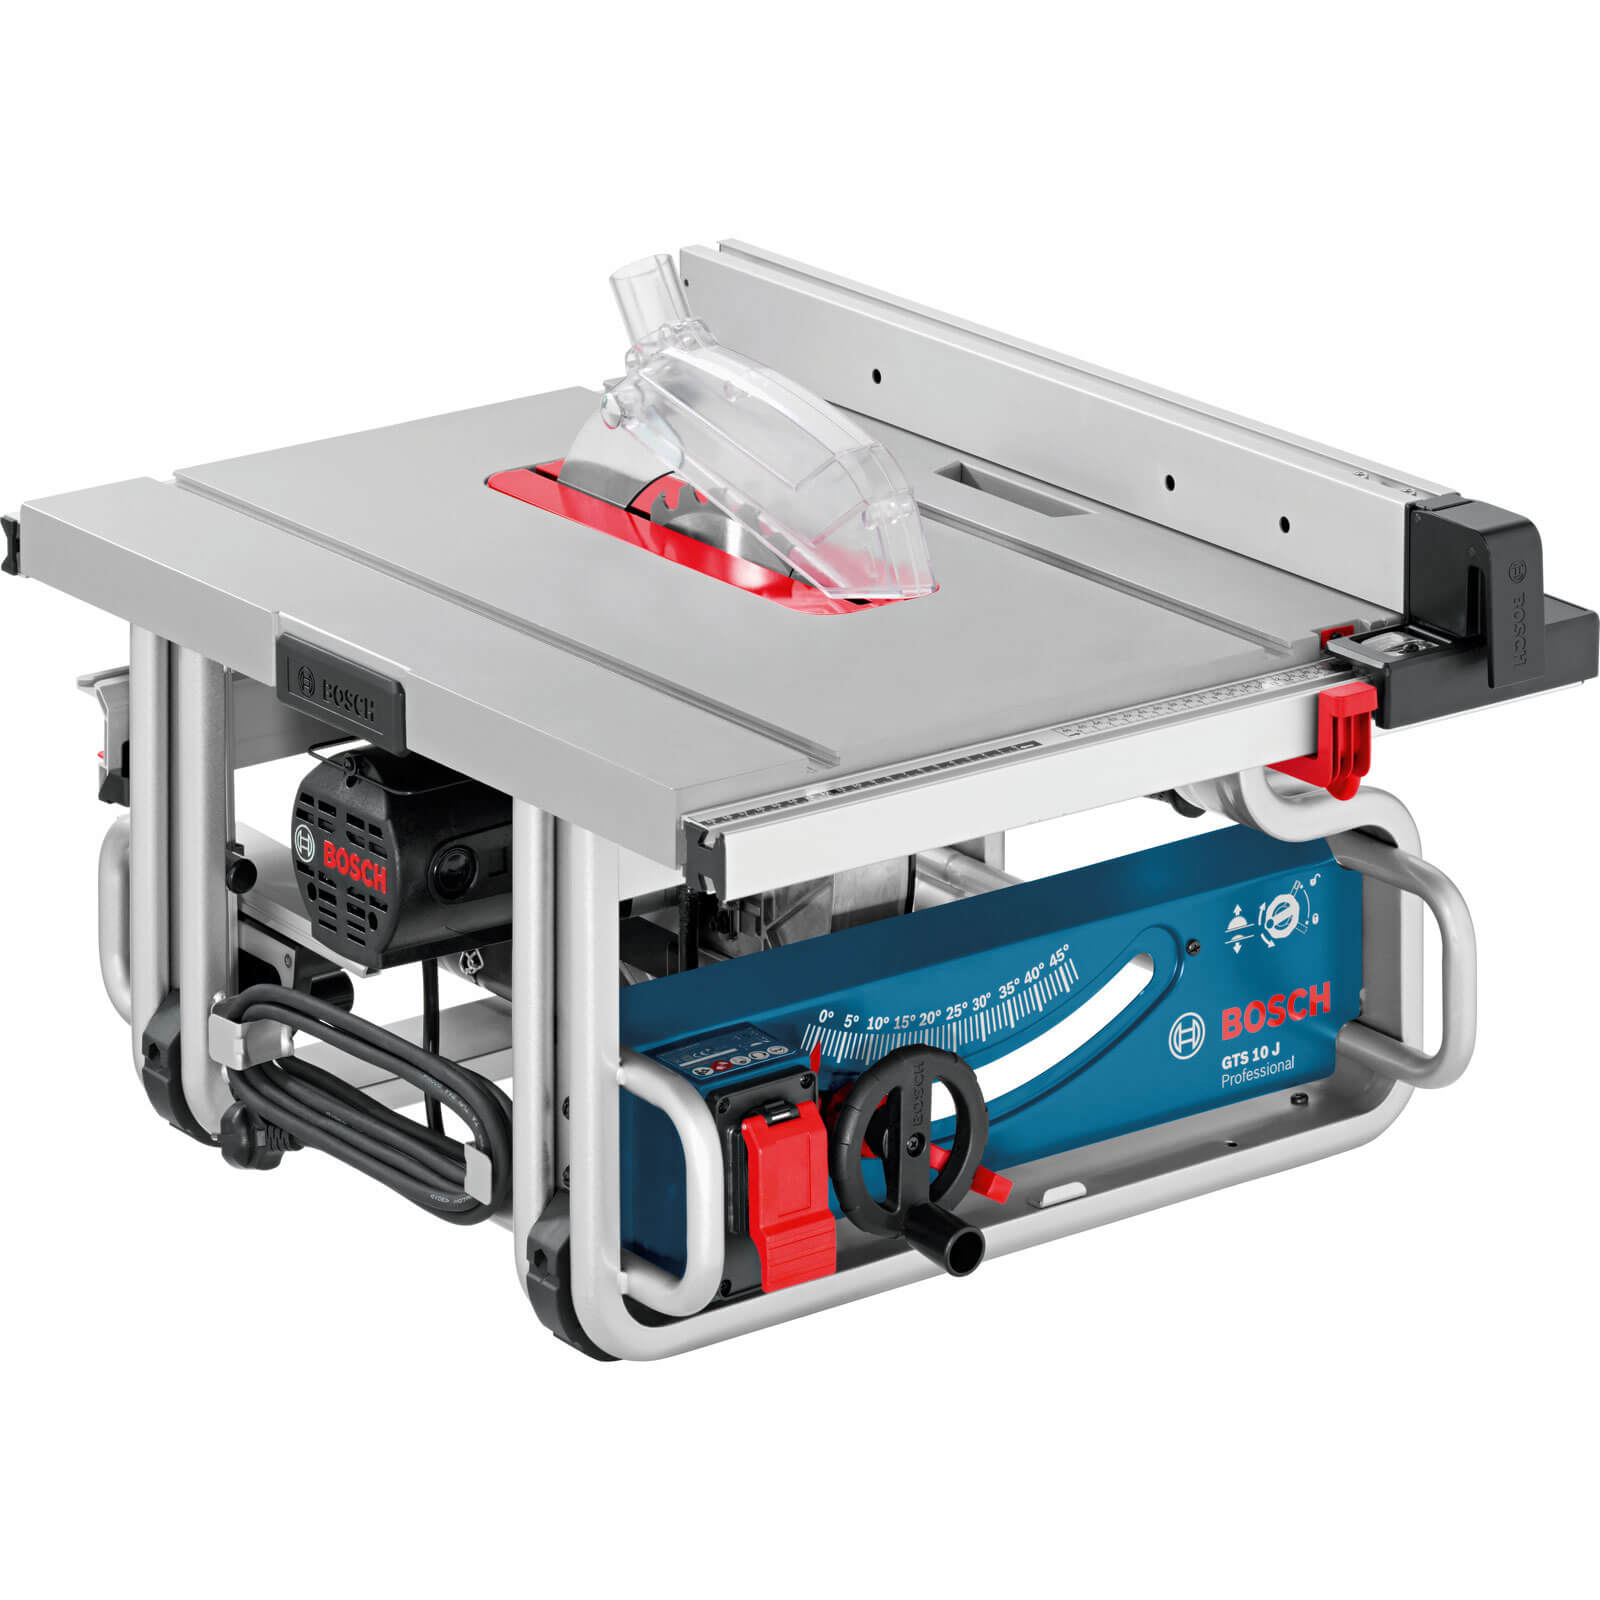 Image of Bosch GTS 10 J Table Saw 110v